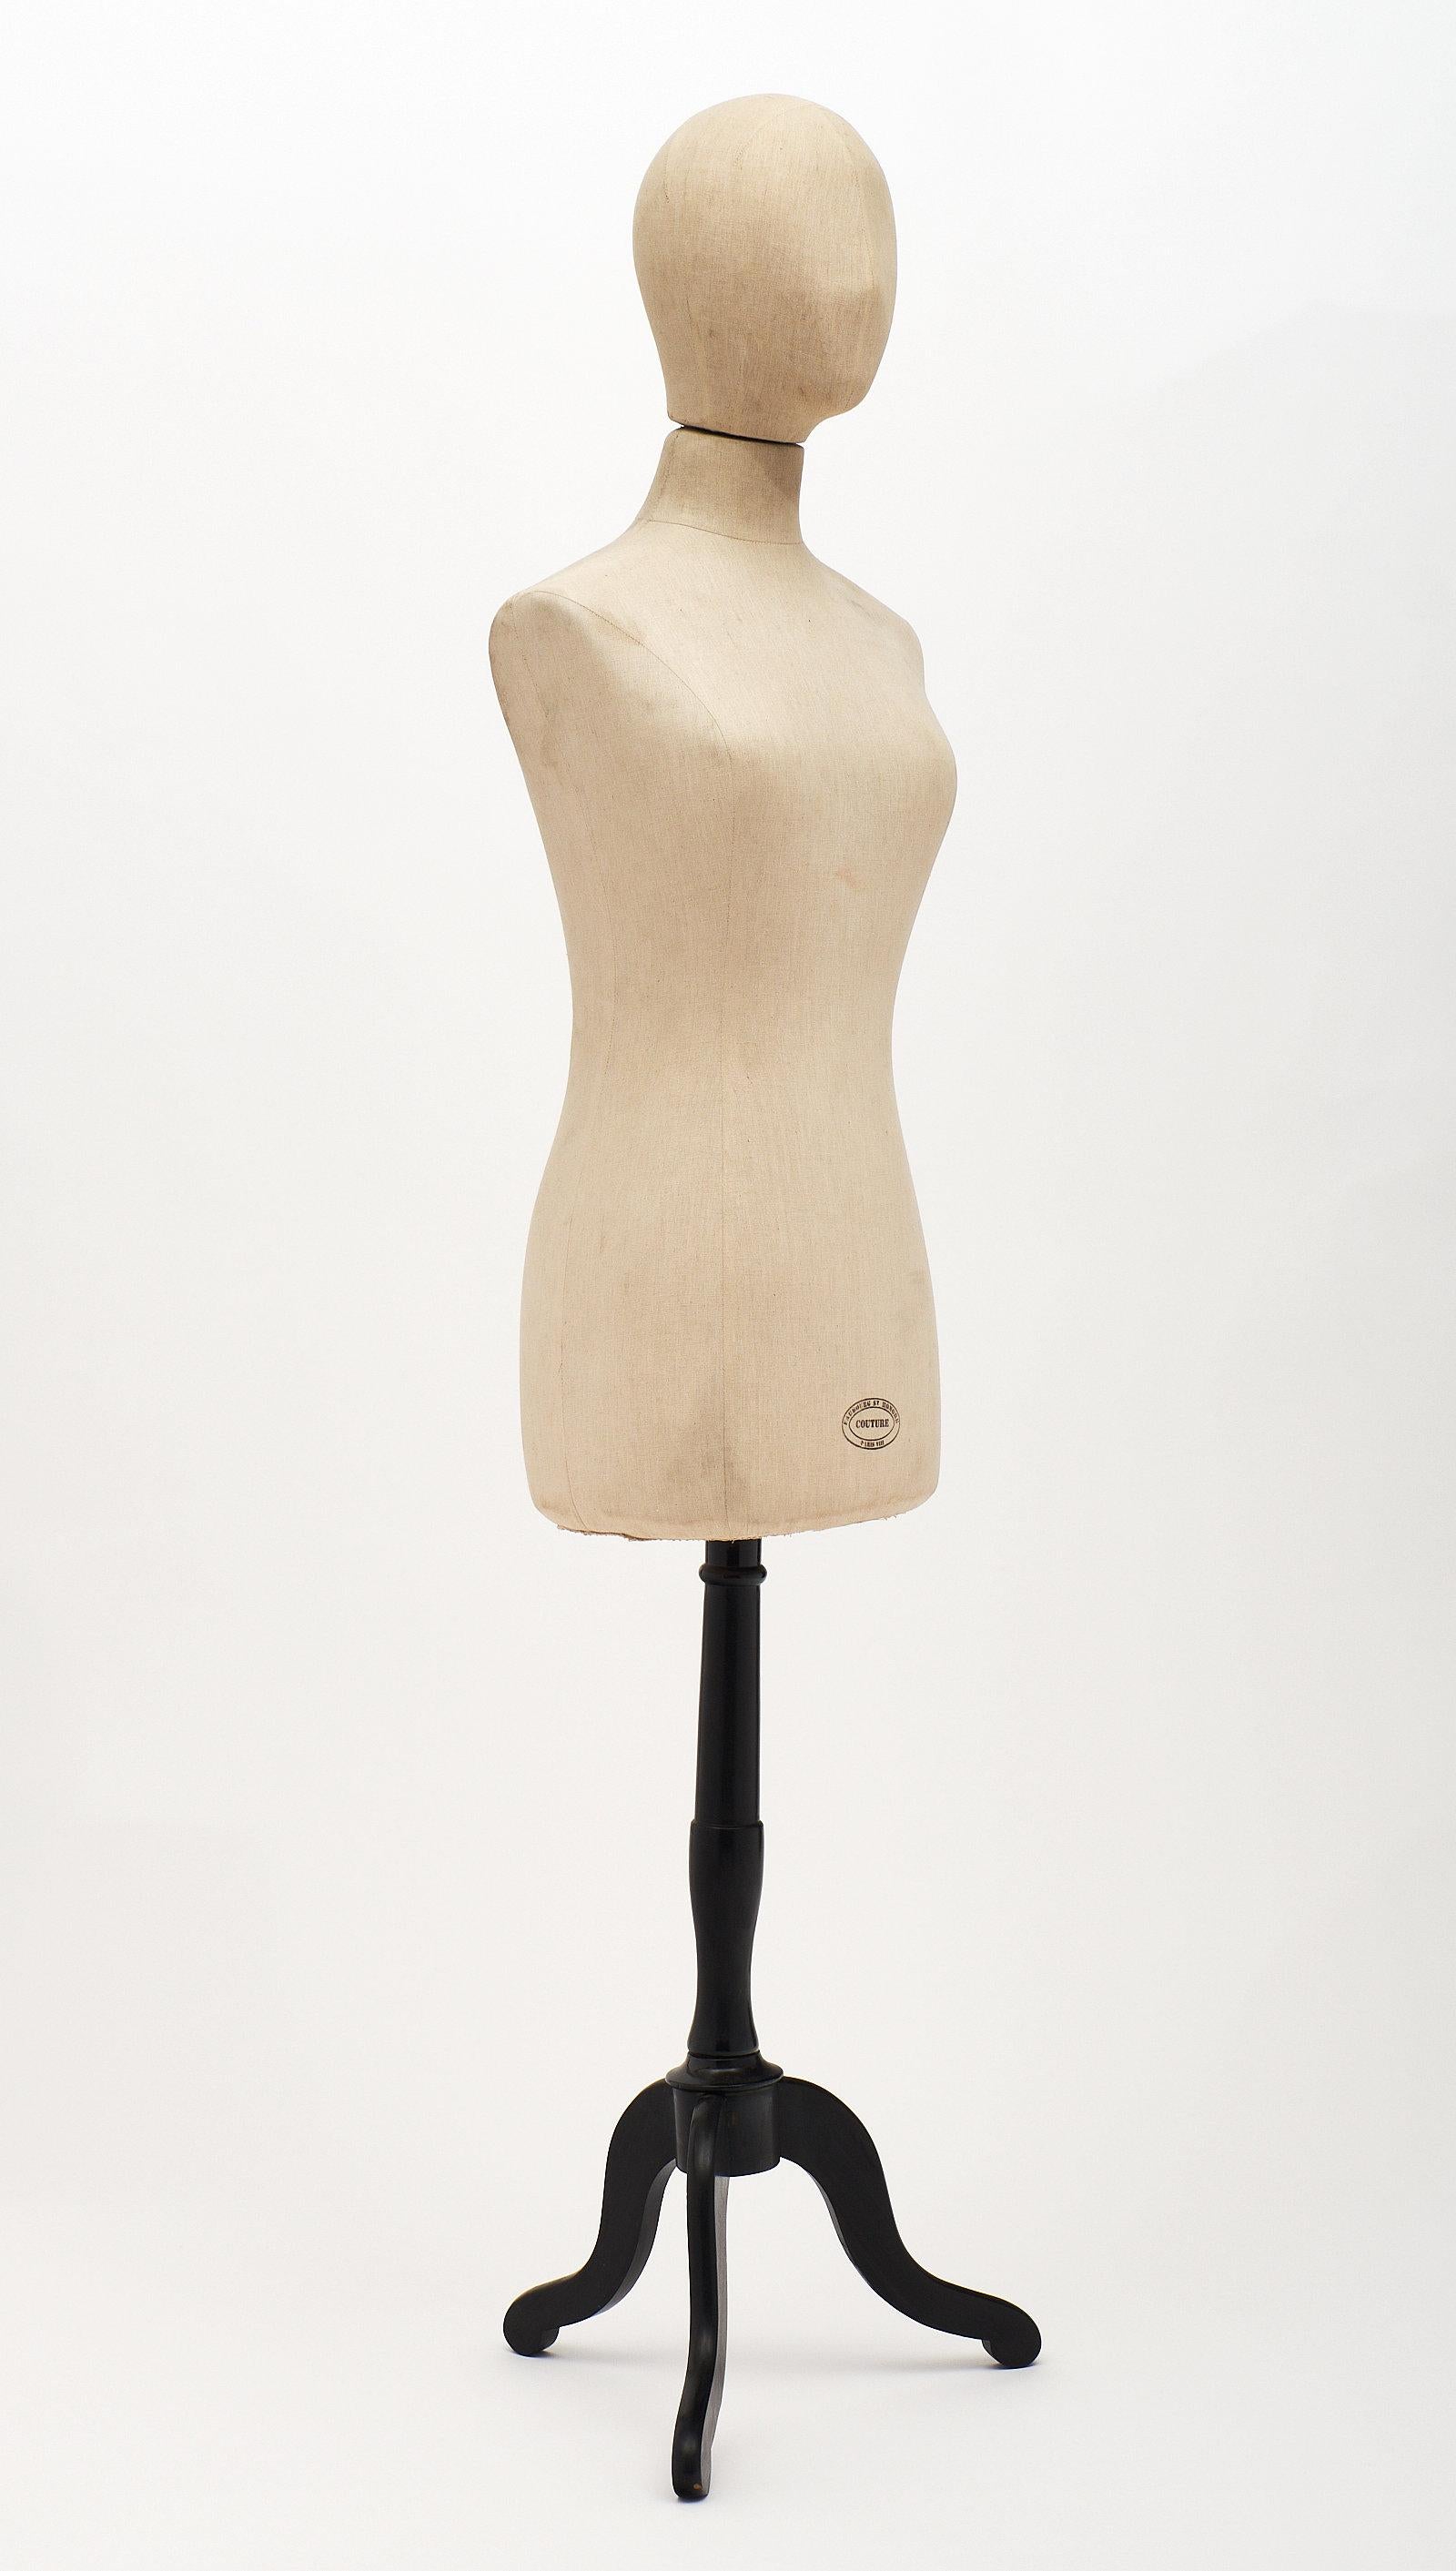 Vintage French couture mannequin on an ebonized wood stand. The stamp on the bottom reads: “Faubourg St Honore; Paris VIII; Couture”.